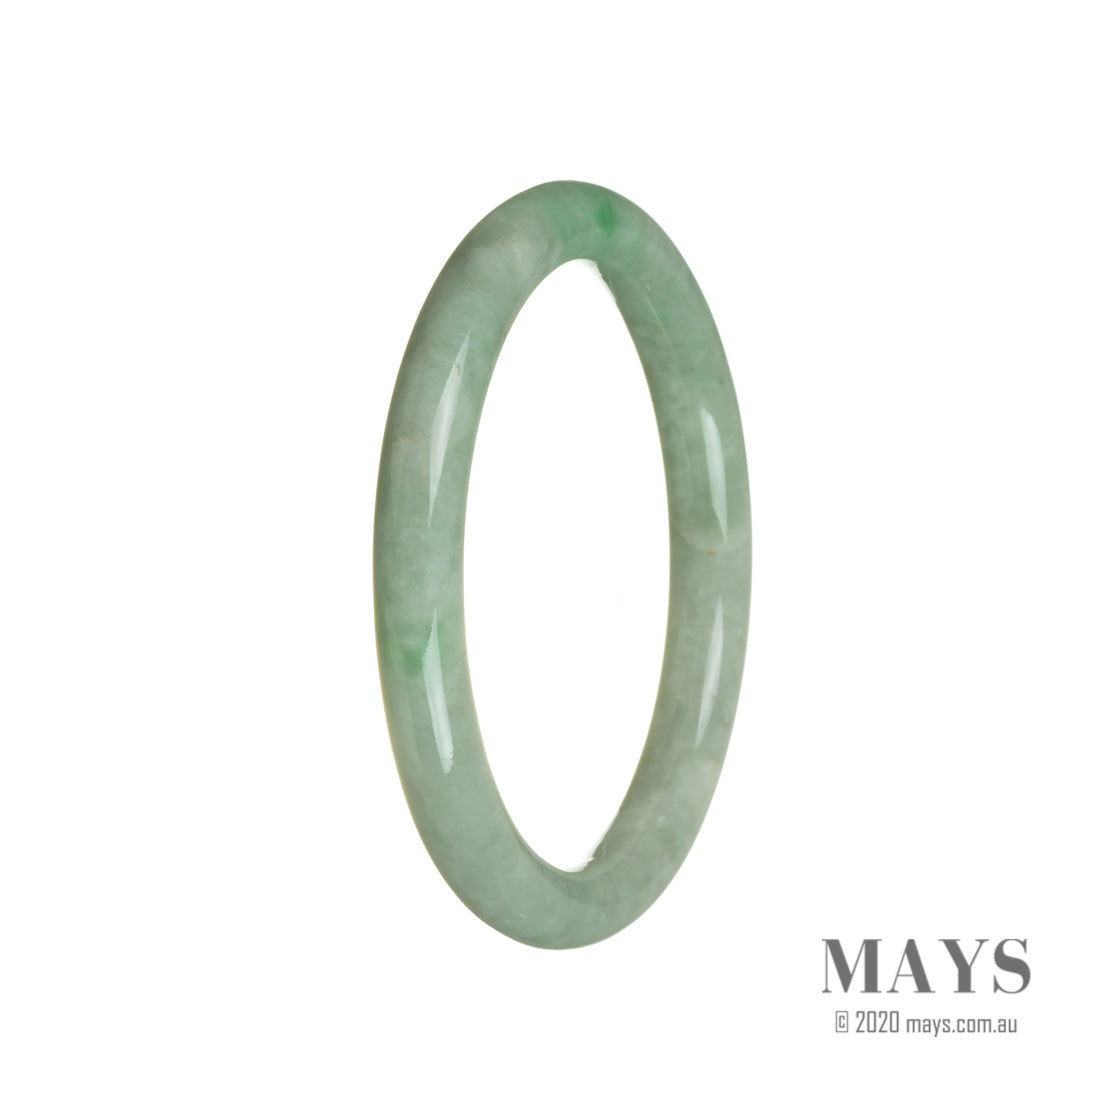 A round, genuine Grade A Green Jade bangle bracelet from MAYS GEMS, measuring 62mm in diameter.